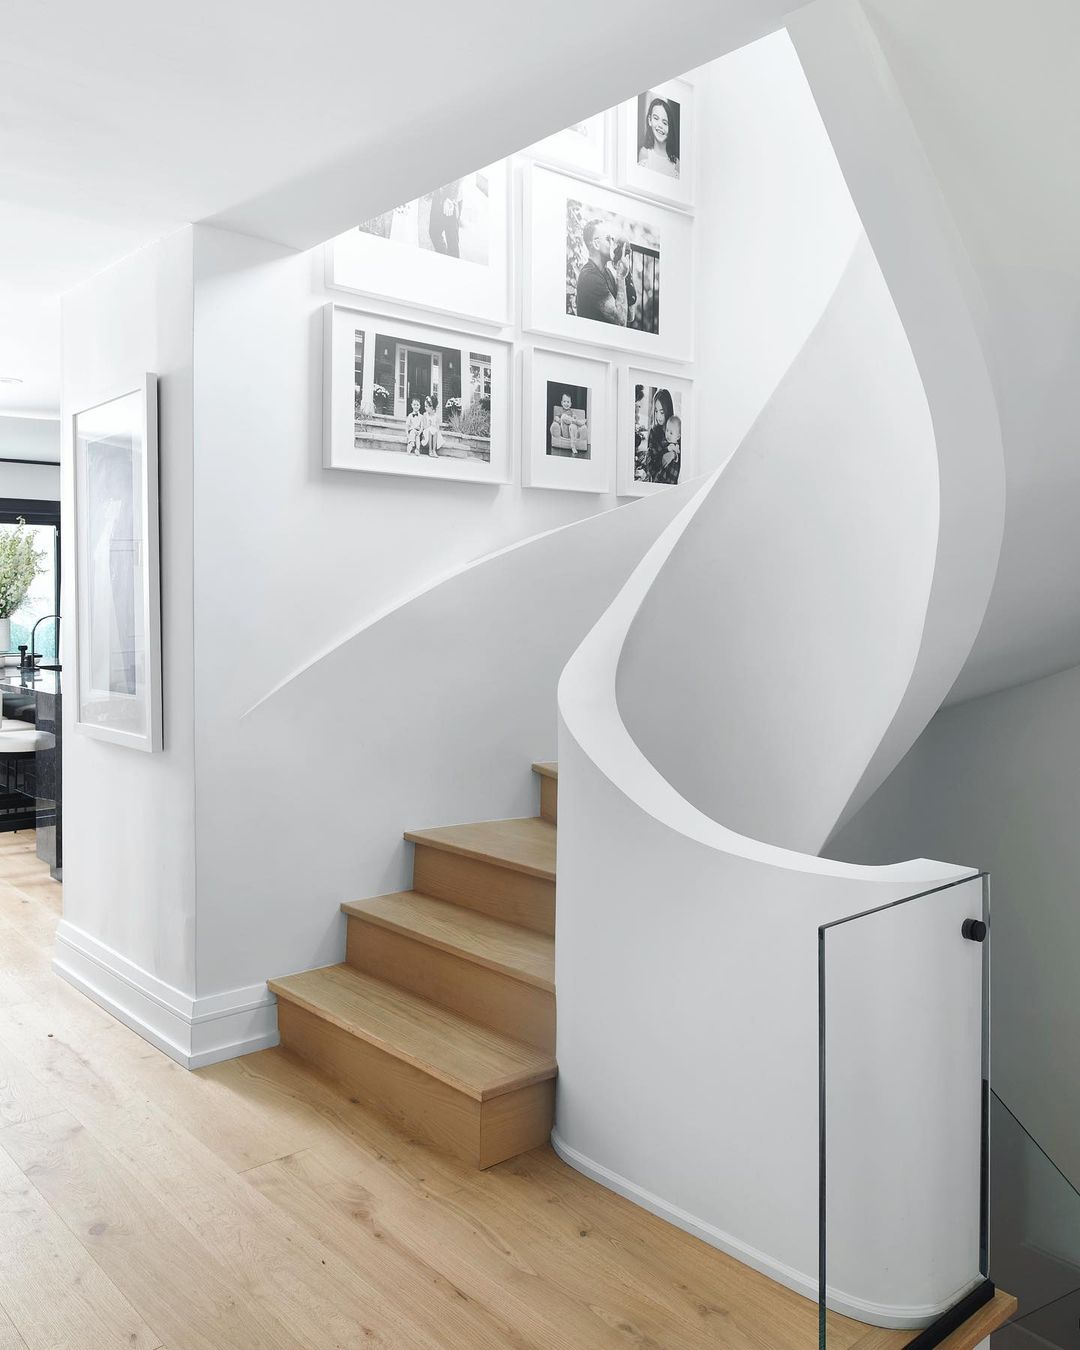 Sculpted Staircase in a Modern Home. Photo by Instagram user @alibuddinteriors